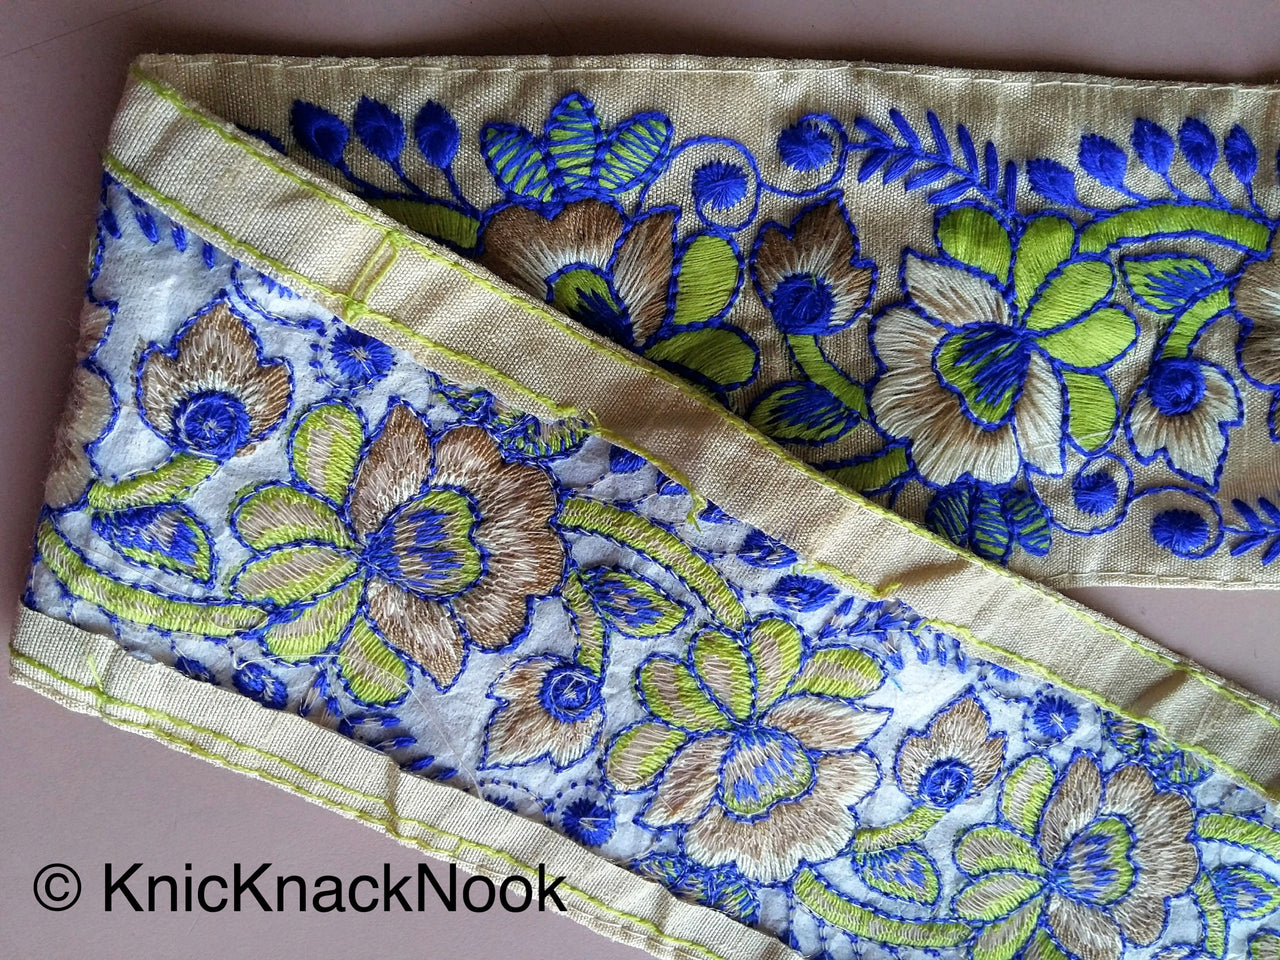 Beige Fabric Trim With Floral Embroidery, Green, Blue And Beige Embroidered Trim